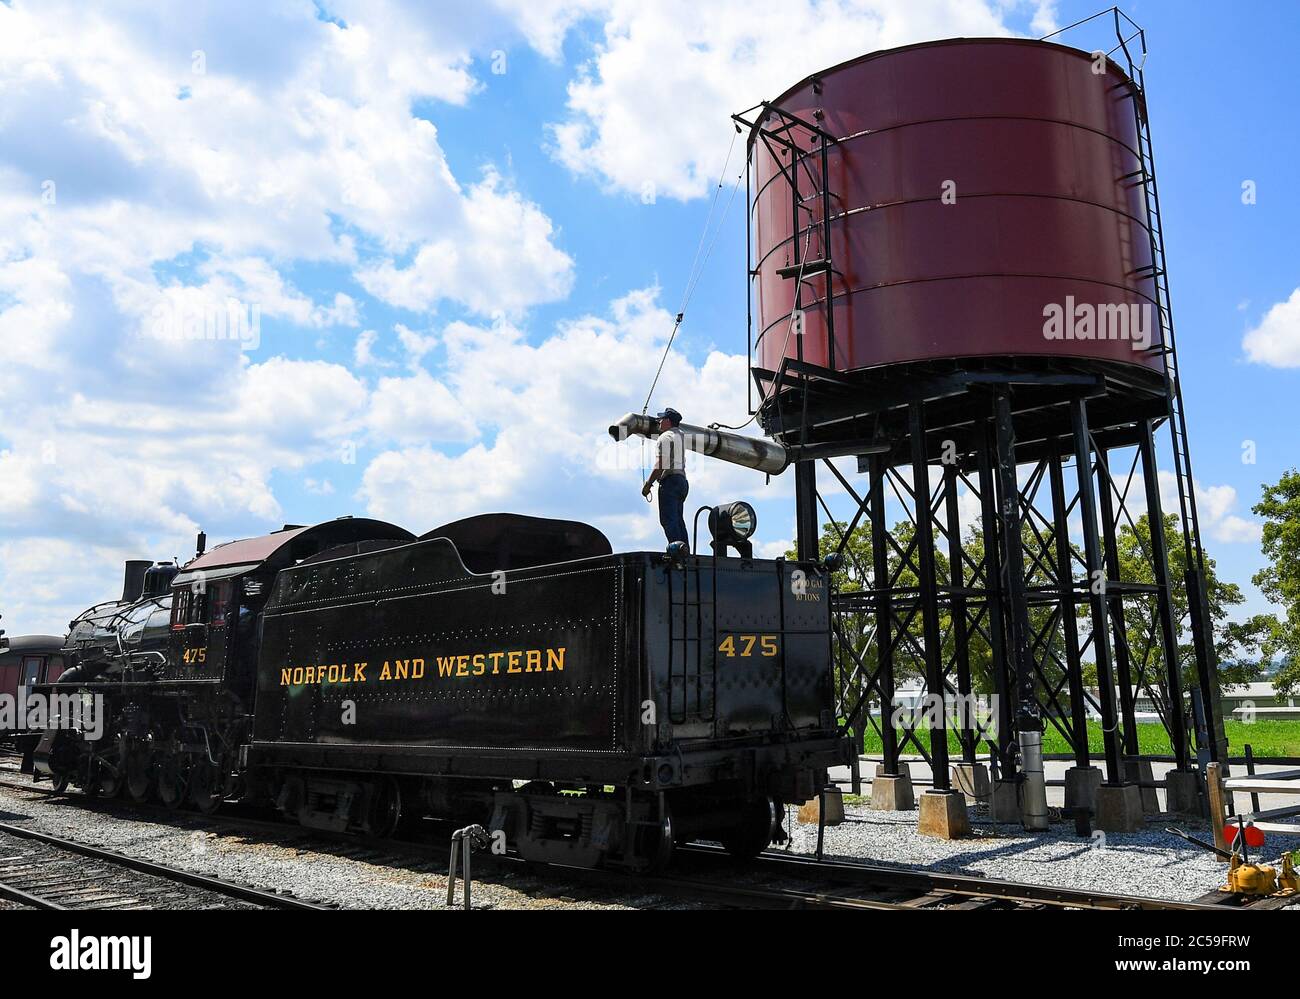 June 29, 2020: The Strasburg Railroad, Norfolk & Western, 475 steam locomotive fireman prepares to fill the water tank following the last excursion of the day on Monday, June, 29, 2020, in Ronks, Pennsylvania. The Strasburg Railroad re-opened for passenger service on Friday, June, 26th, after being closed due to the COVID-19 pandemic. Additional health related safety measures have been put in place for the re-opening. Rich Barnes/CSM Stock Photo